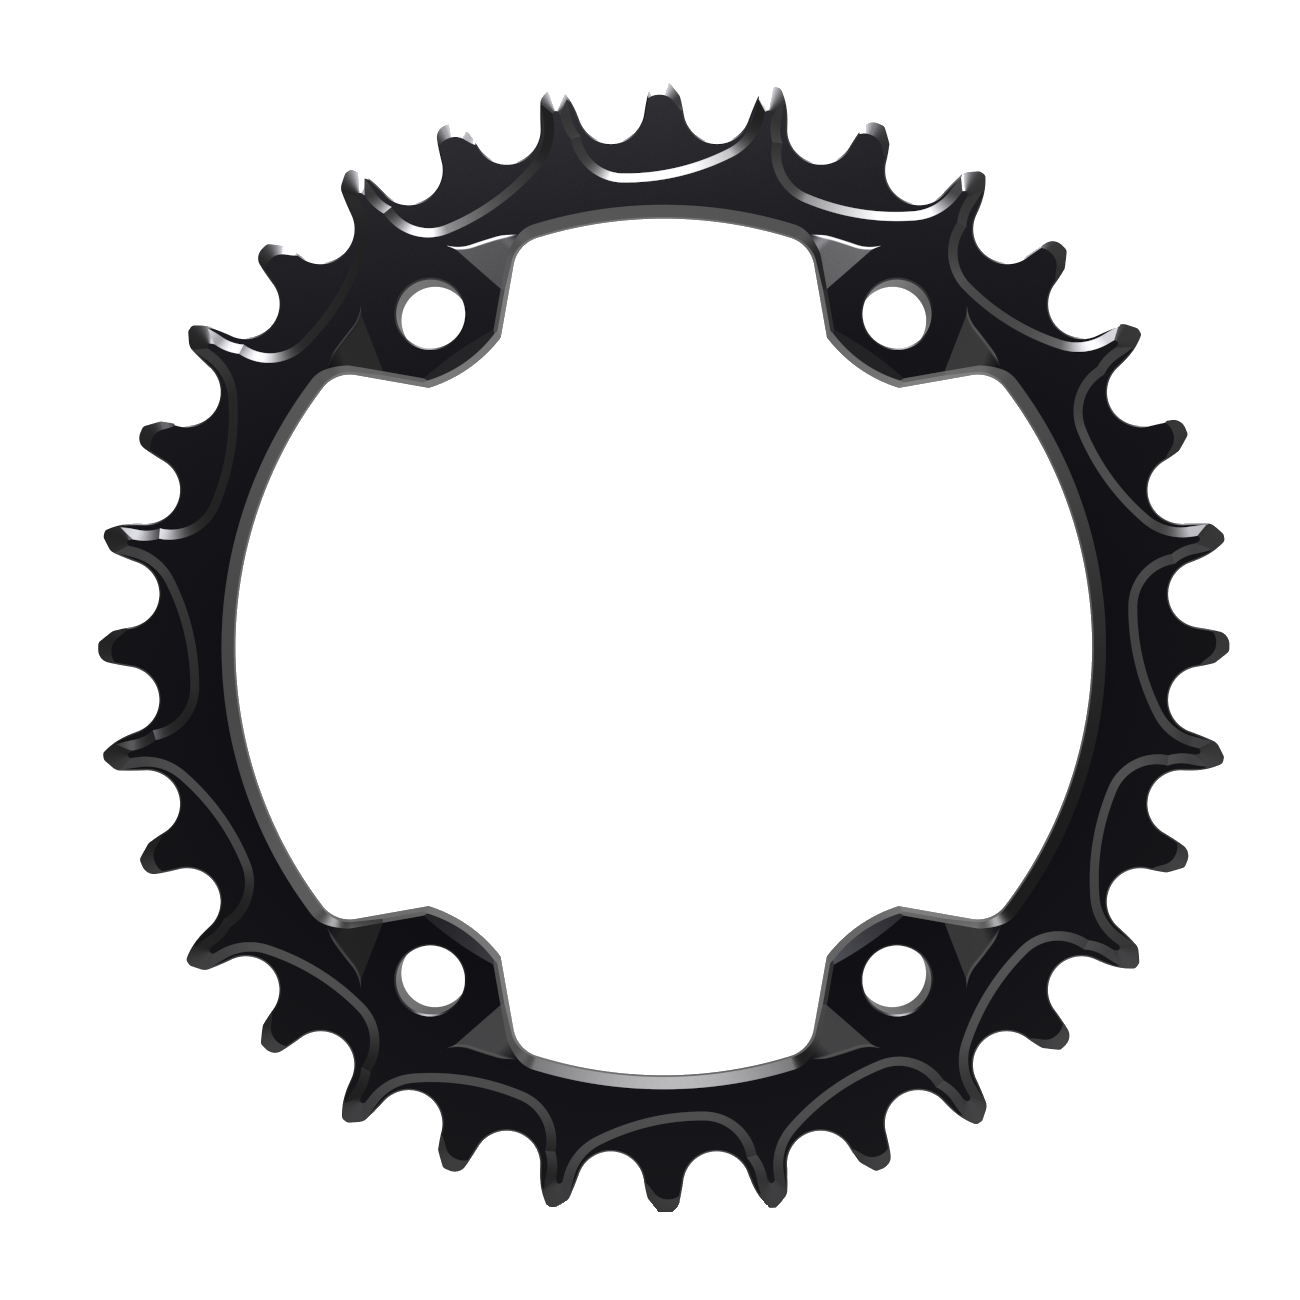 Productfoto van Alugear Narrow Wide MTB Chainring - for Shimano 96 BCD Asymmetric - 4-Bolt